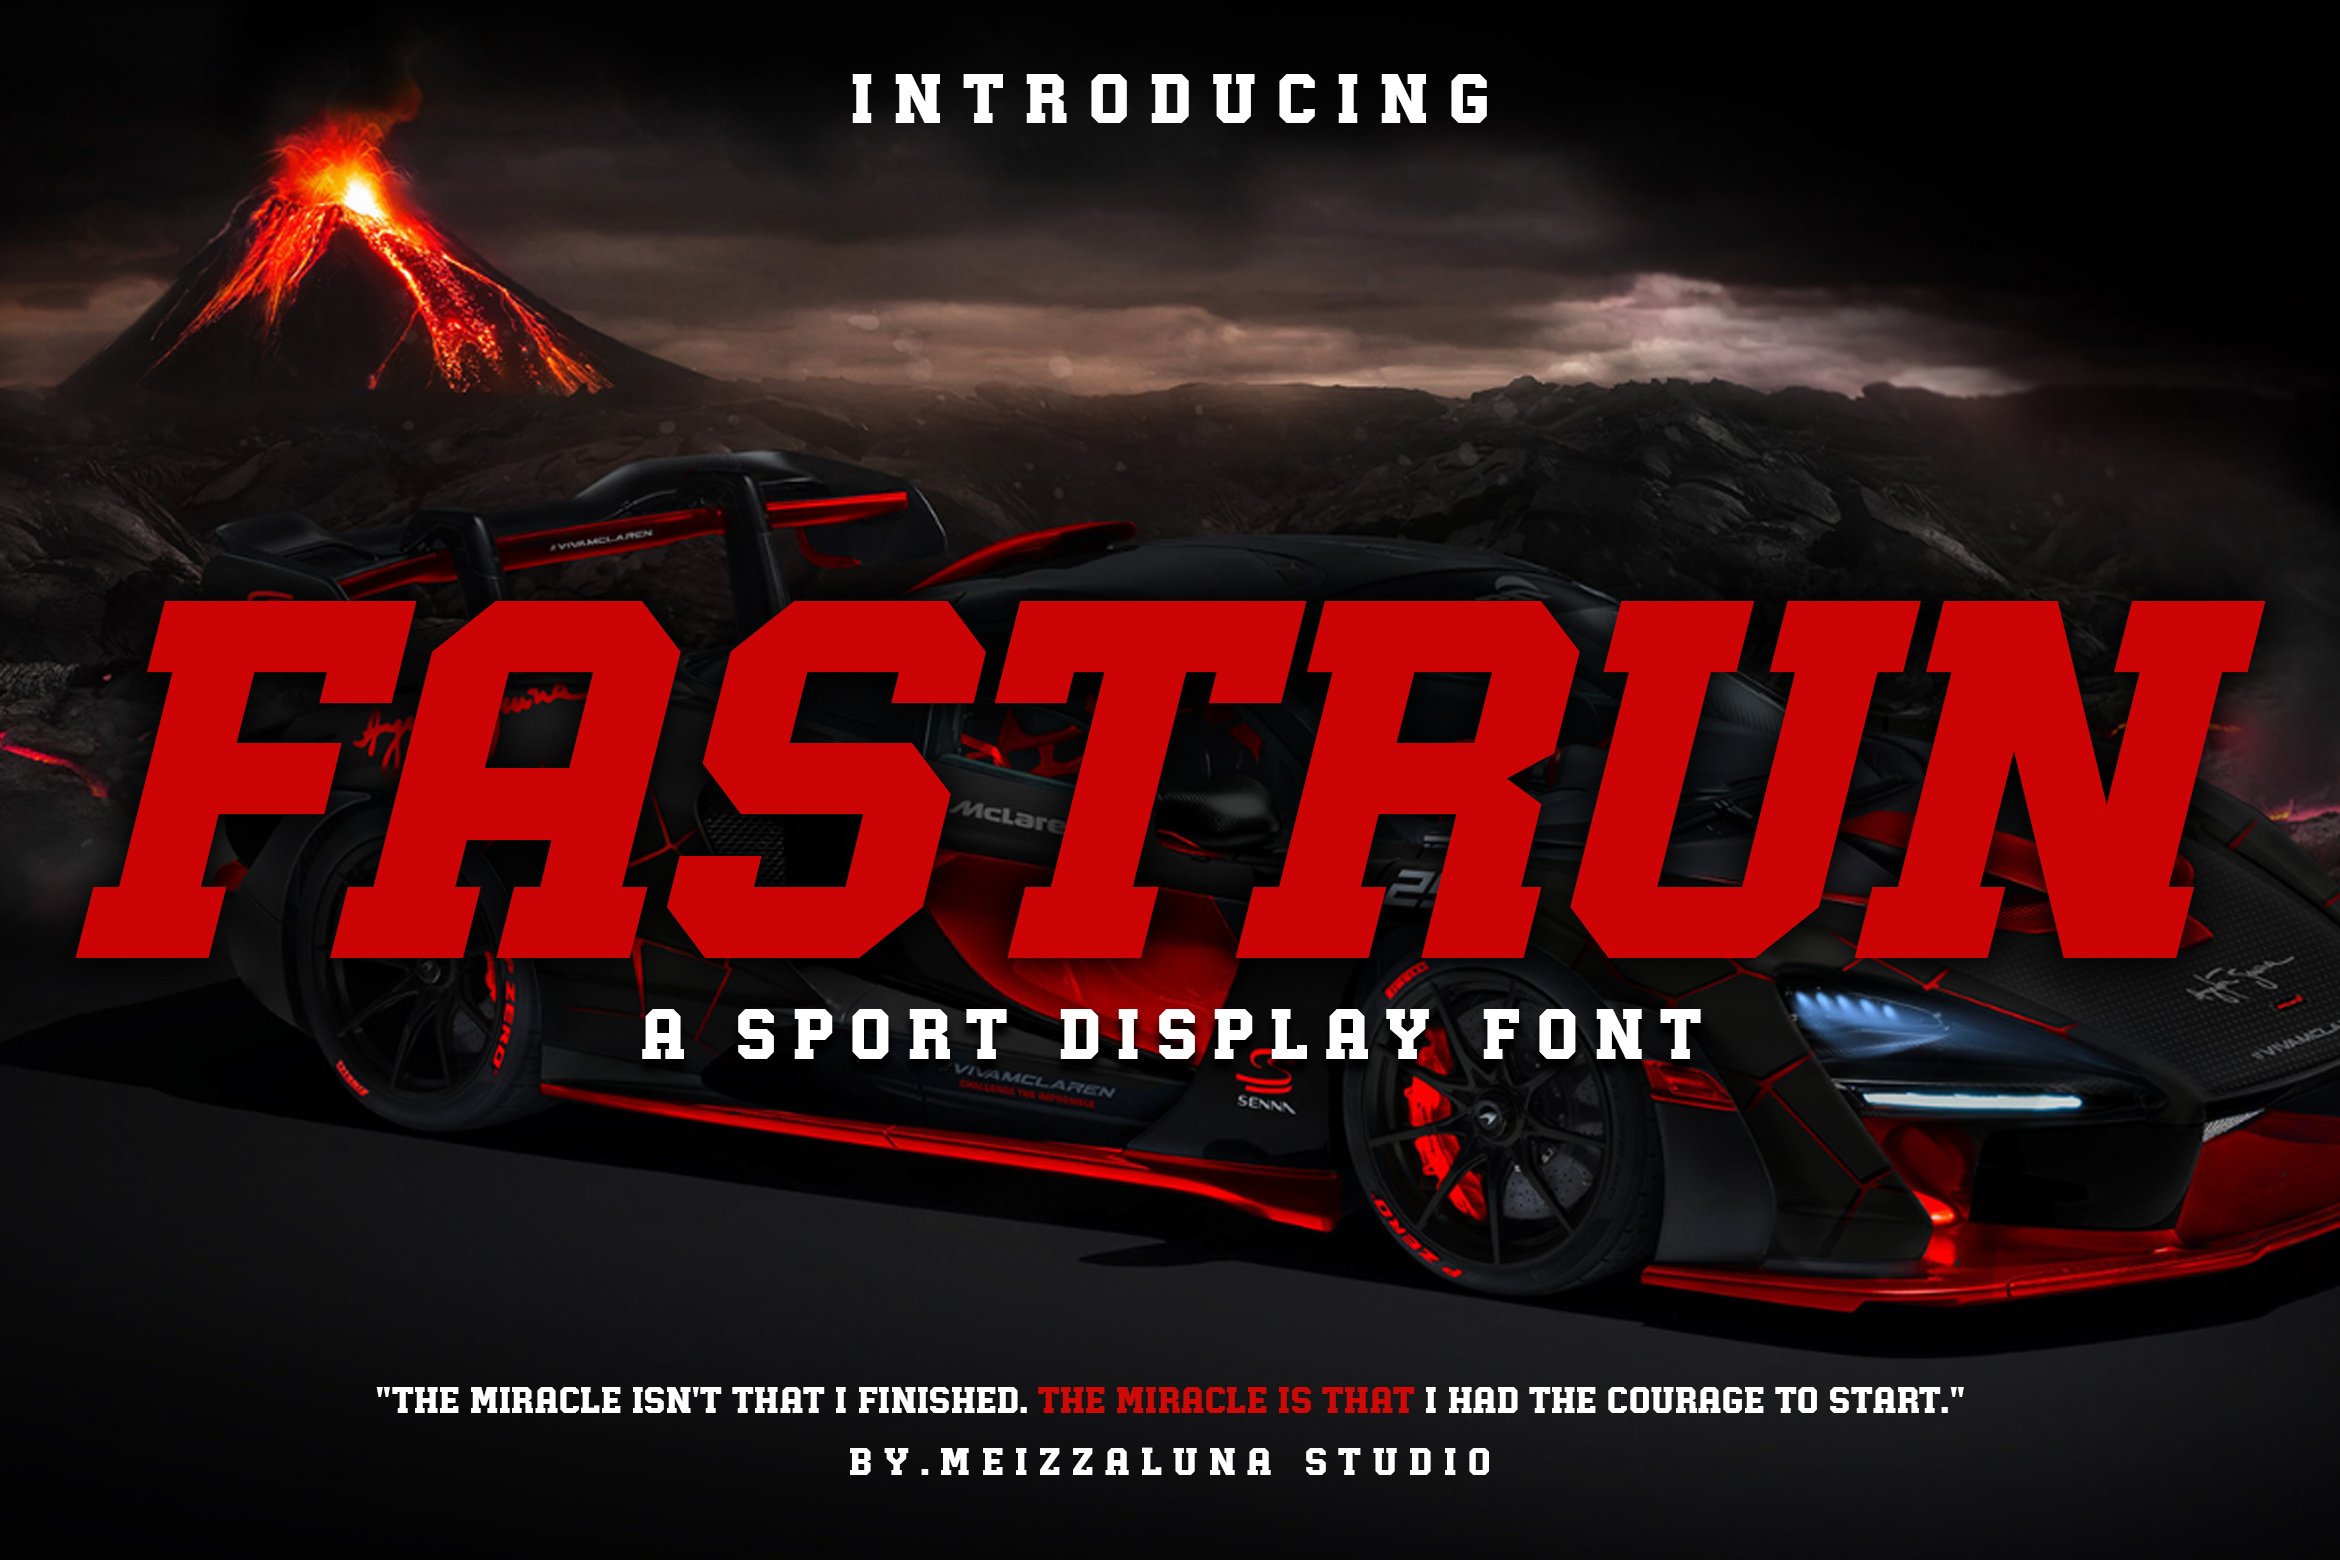 Fastrun - A Sport Display Font cover image.